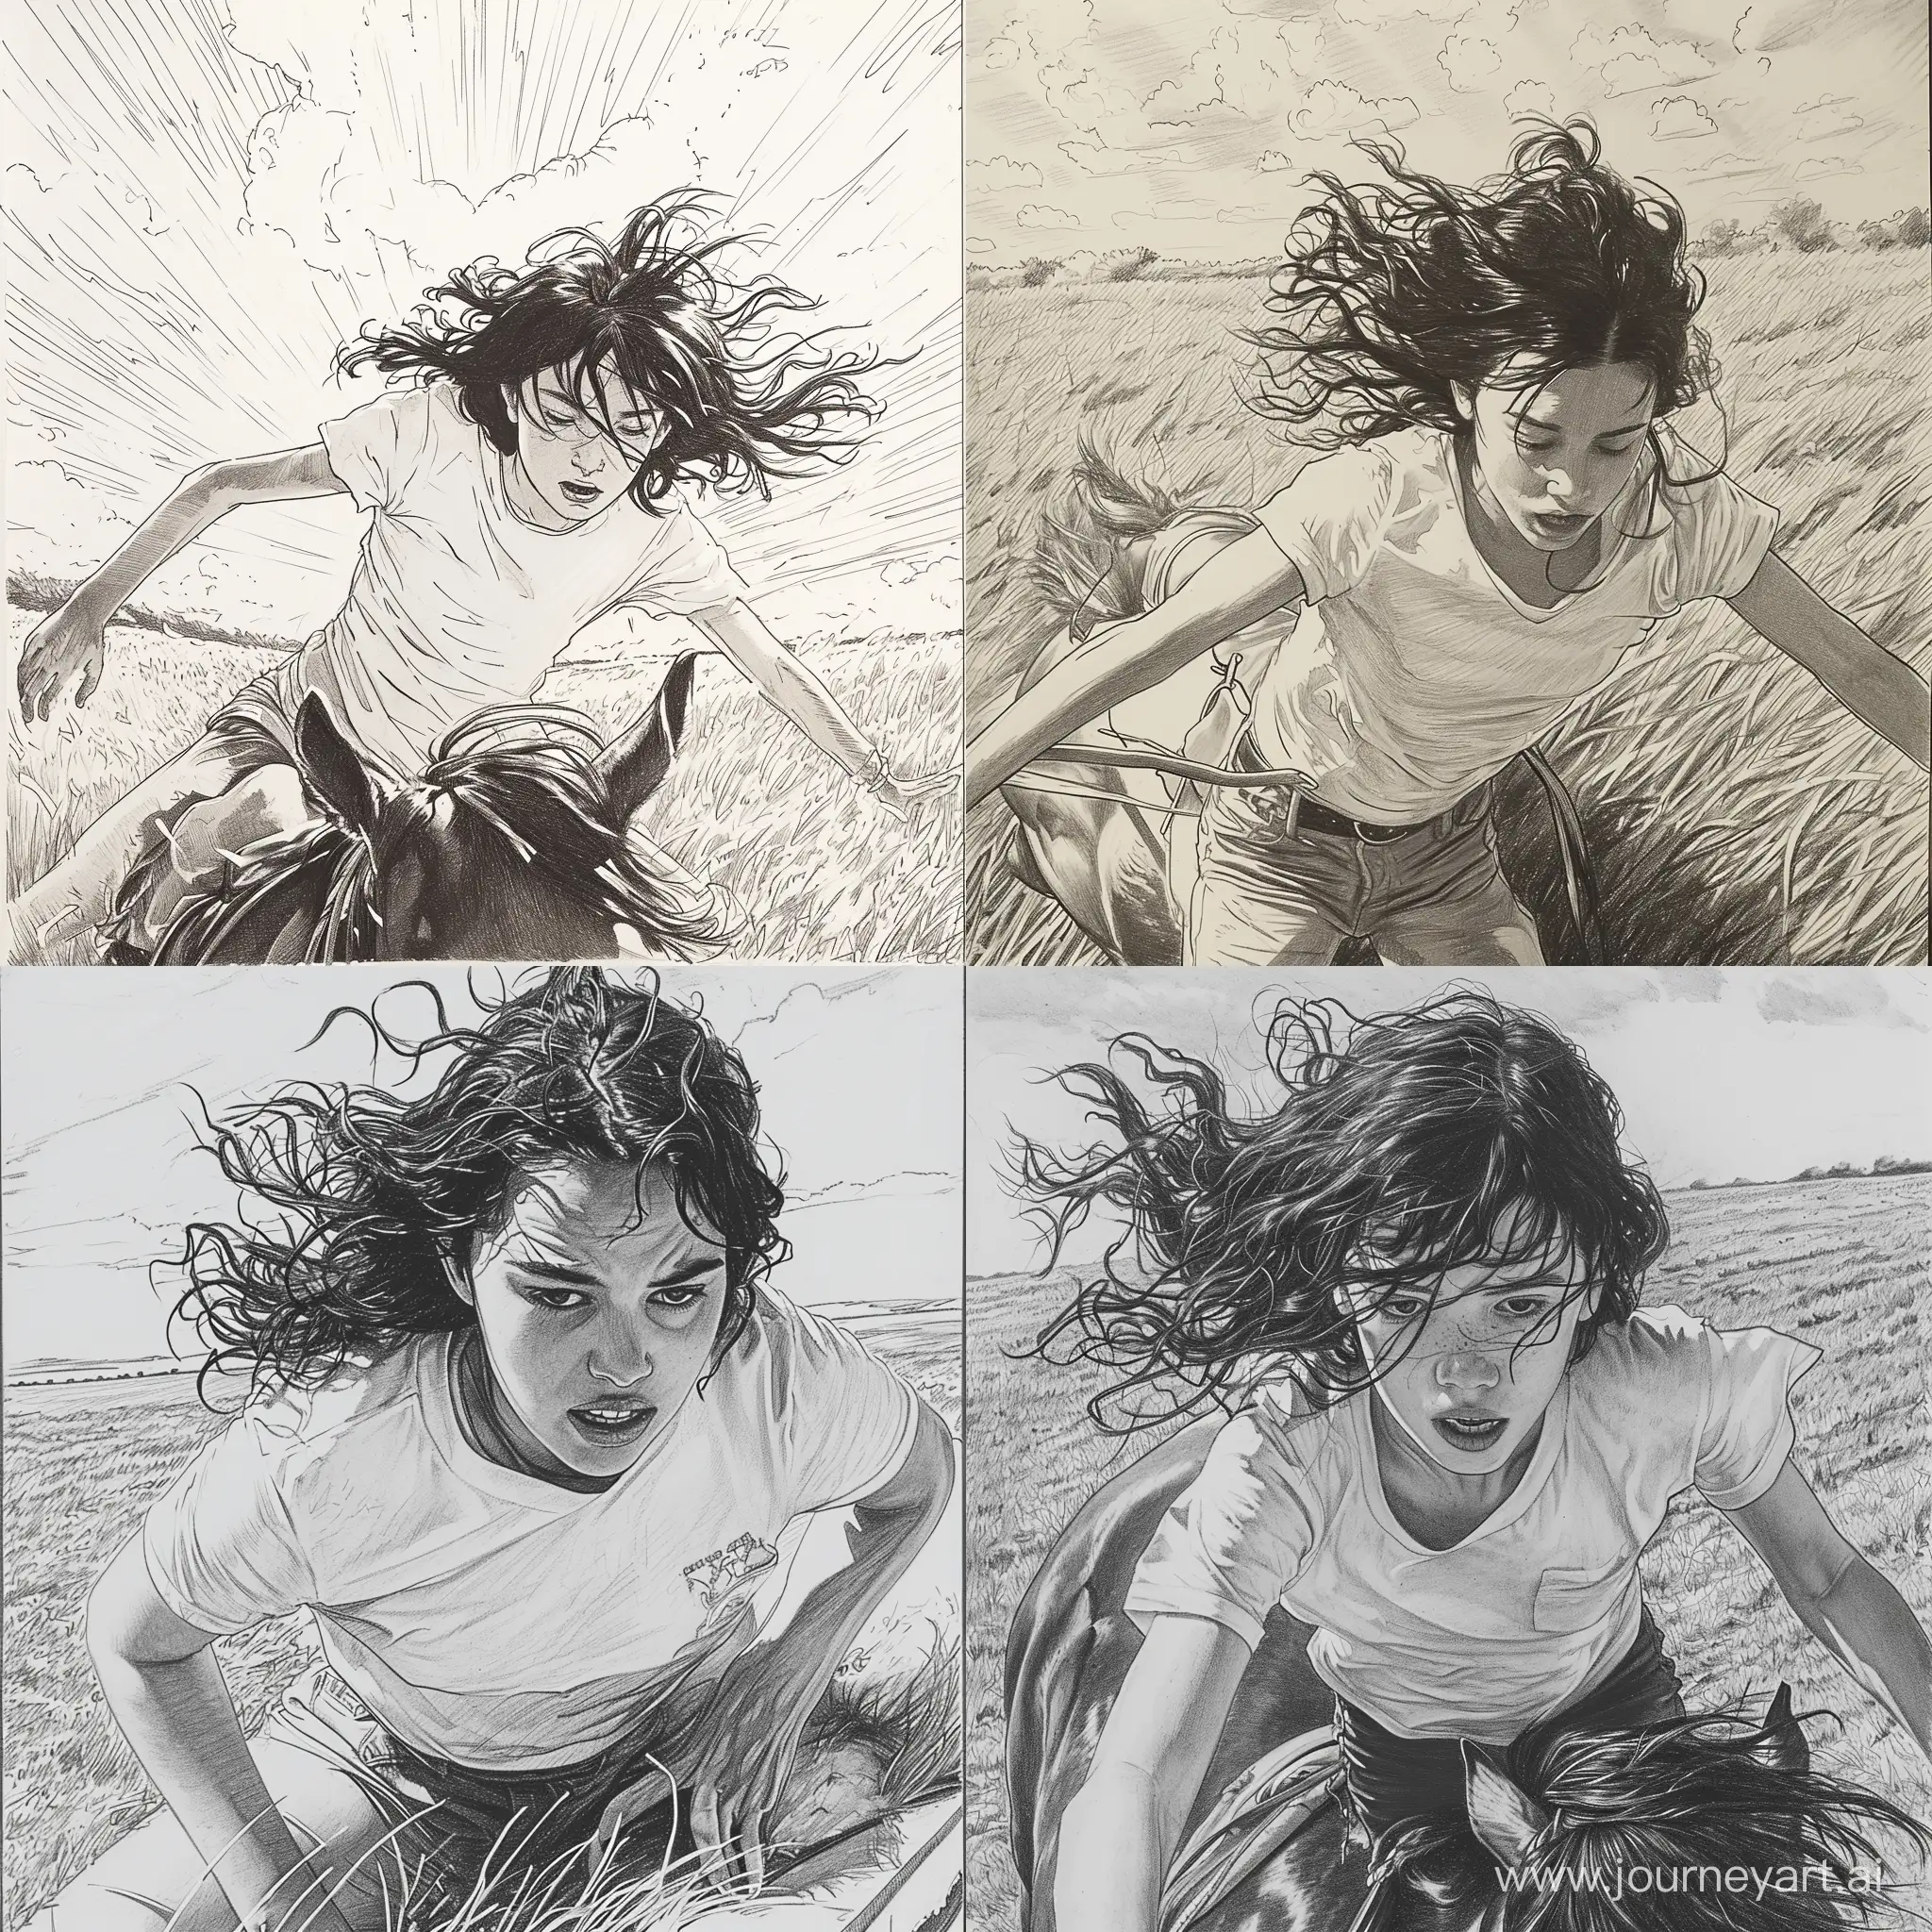 A teenage girl in a white T-shirt, with black wavy hair, falls from a horse, drawn in pencil, sunny, a field of grass